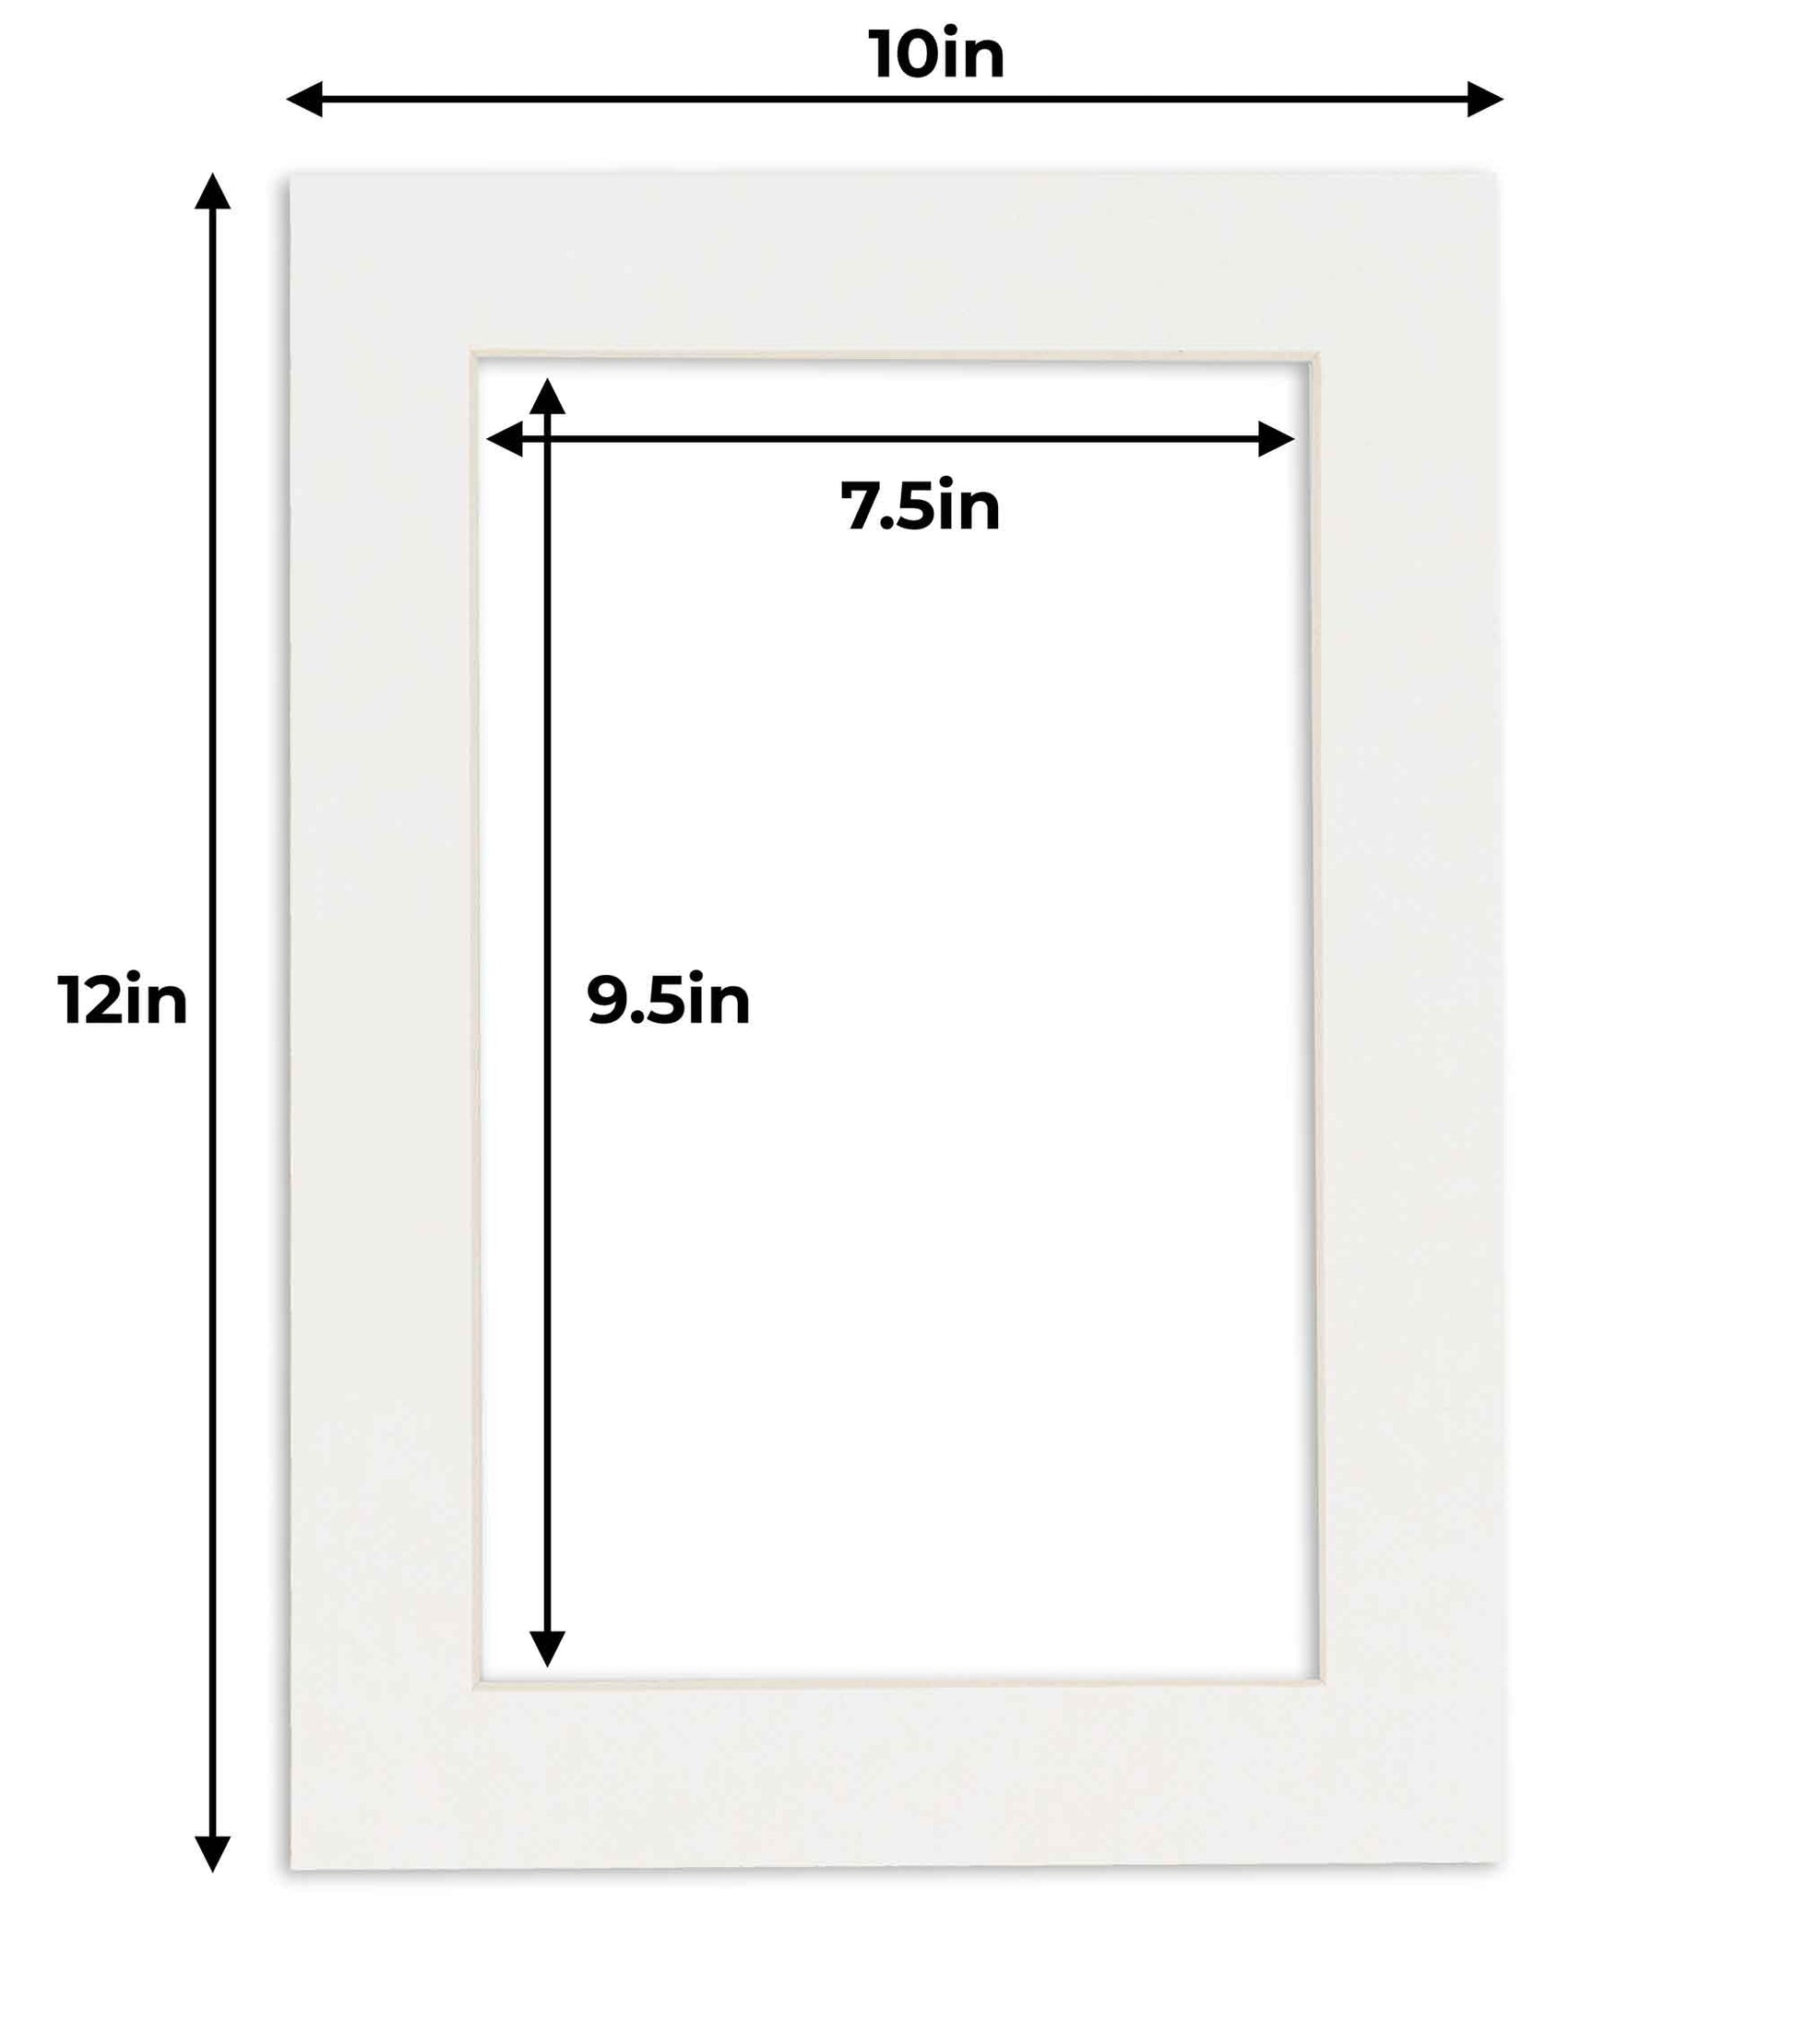 8x10 Mat for 16x20 Frame - Precut Mat Board Acid-Free White 8x10 Photo  Matte Made to Fit a 16x20 Picture Frame, Premium Matboard for Family  Photos